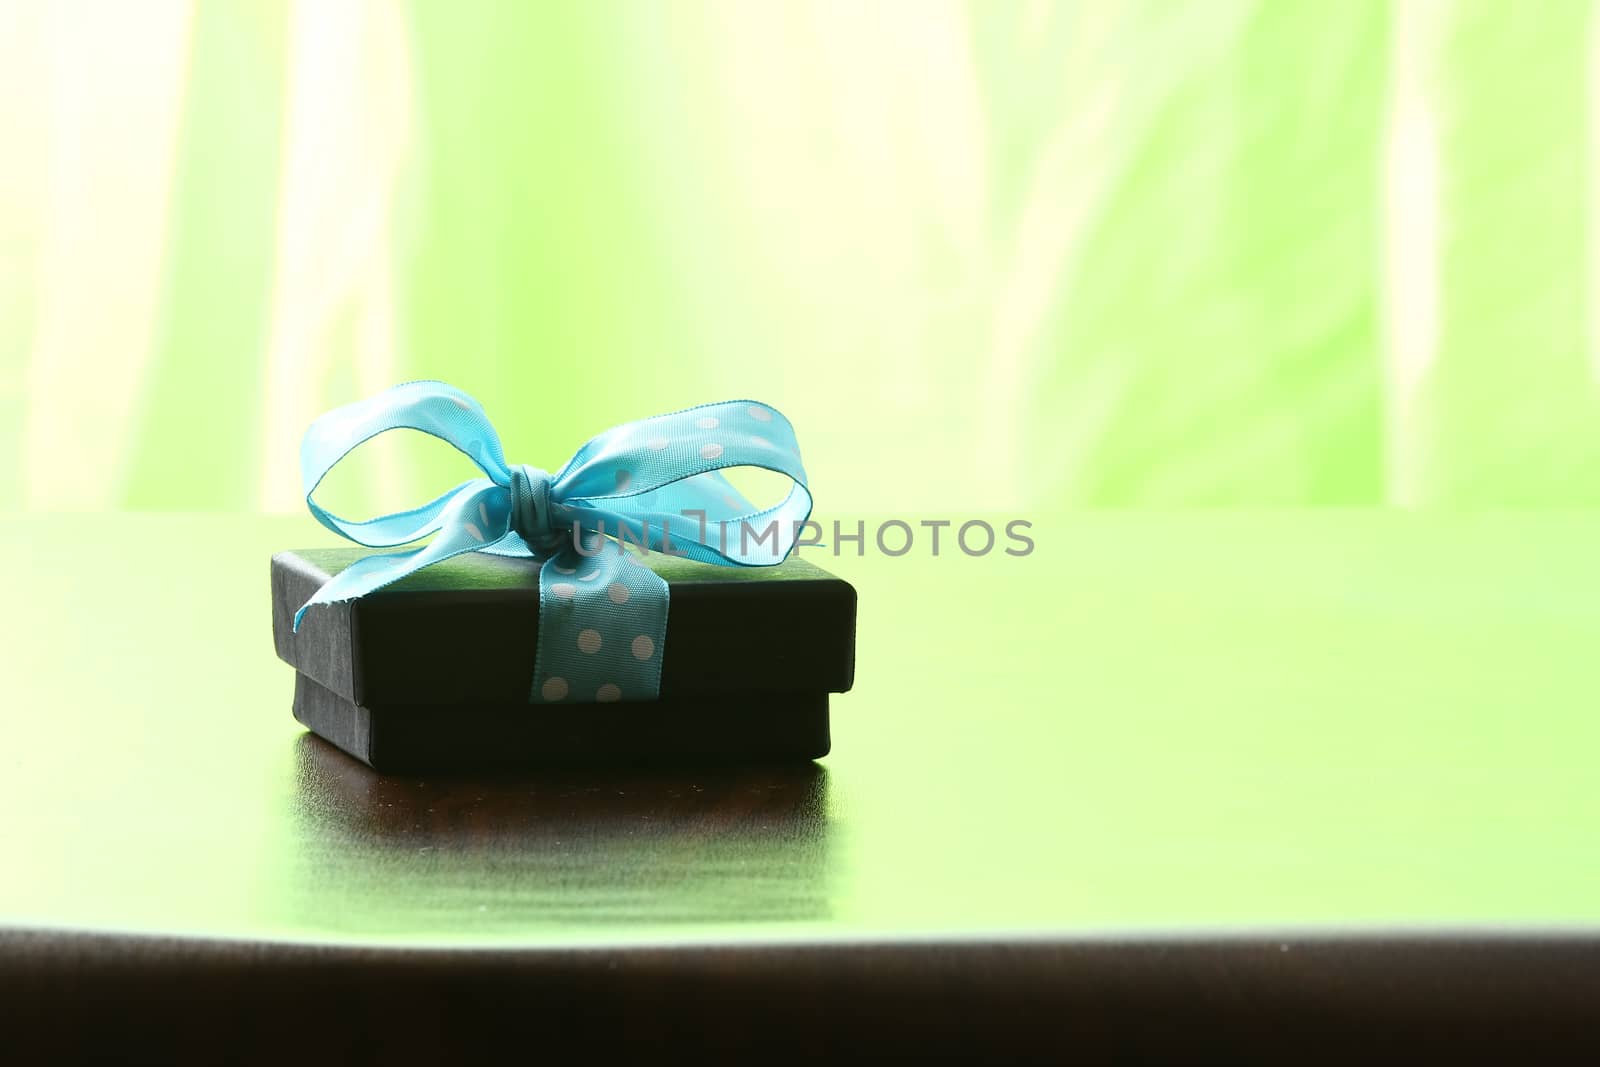 Presents on a table with a bow. Background space for copy. For Christmas, birthday or other holiday cards